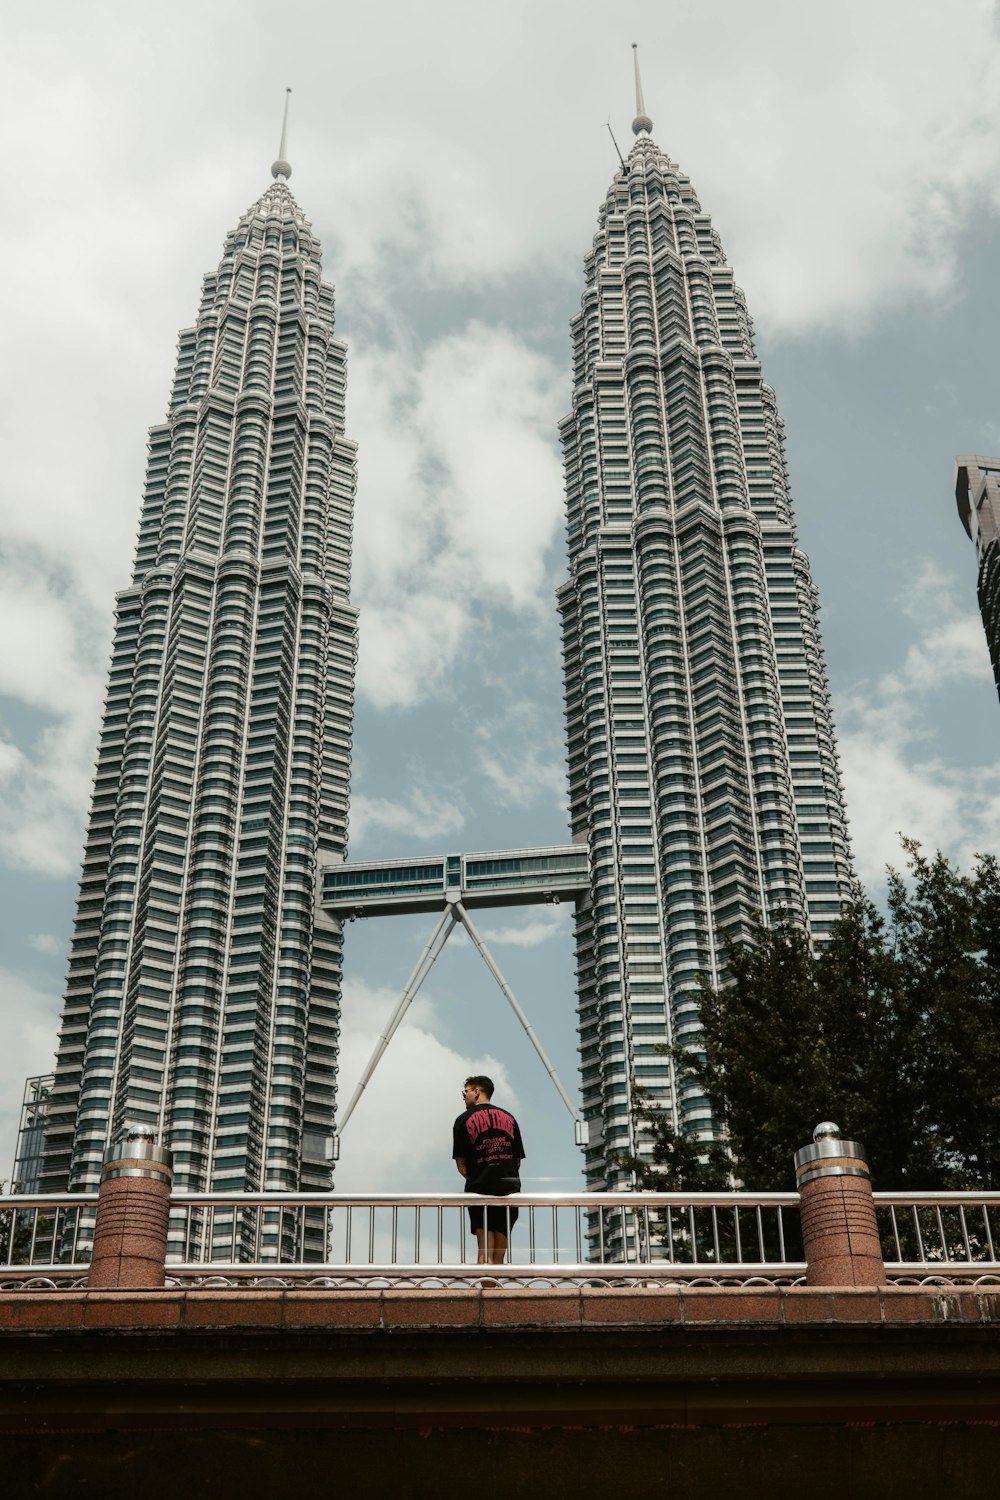 a man standing on a bridge in front of two tall buildings